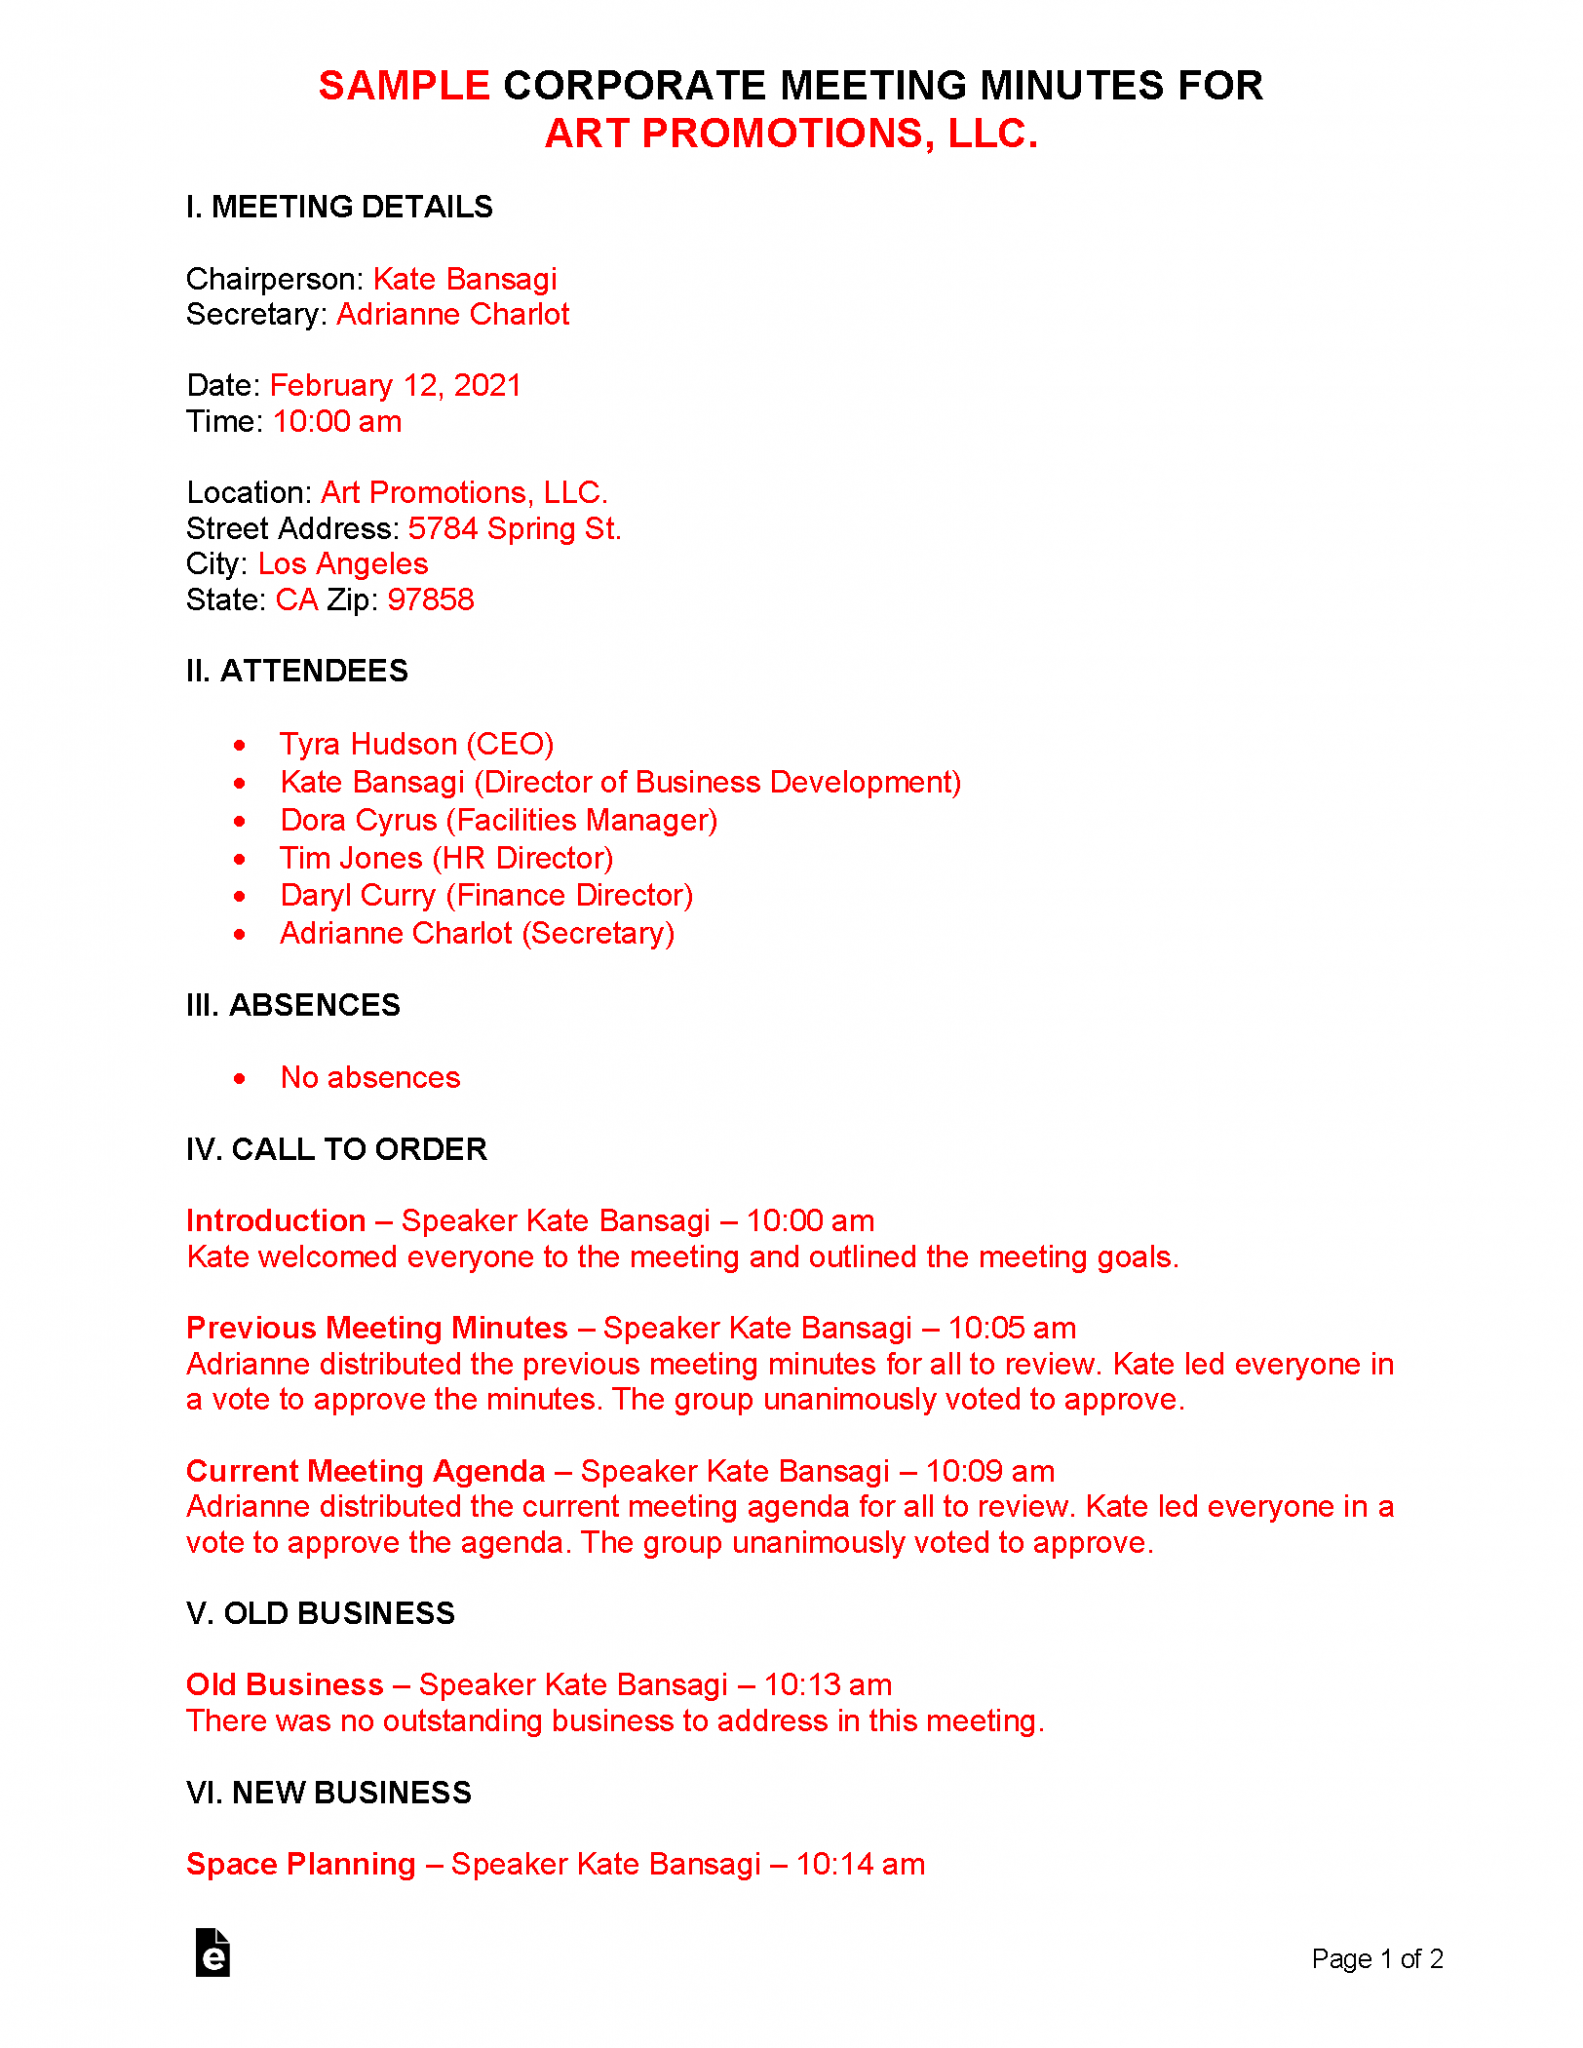 Free Corporate Meeting Minutes Template | Sample - Word | PDF – eForms